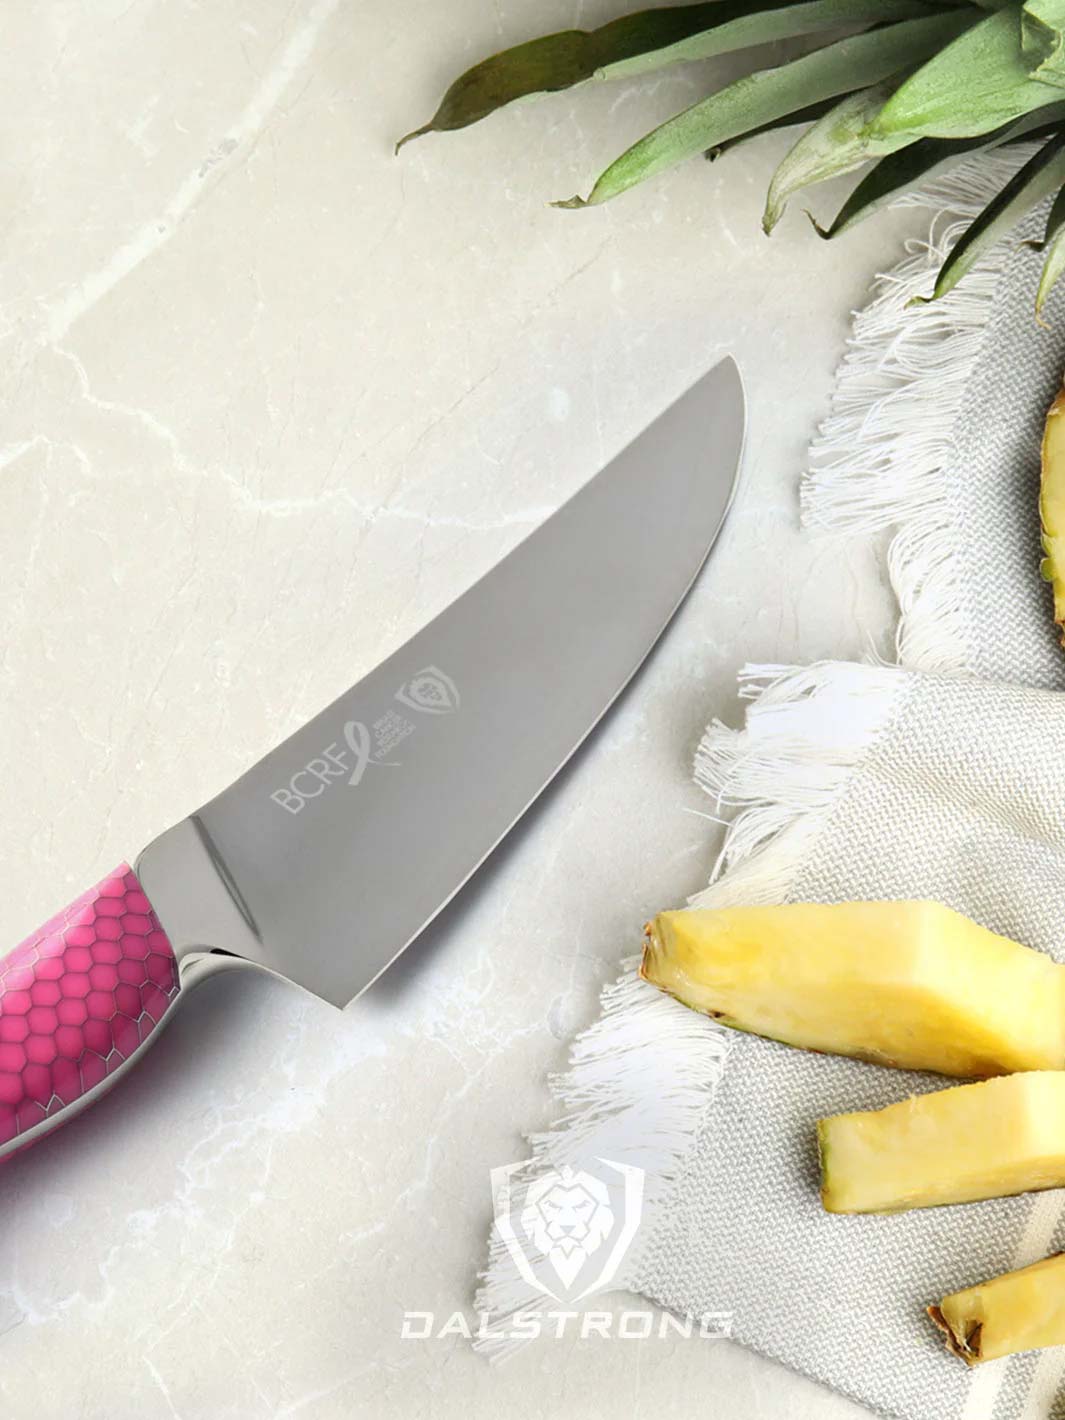 Dalstrong frost fire series 8 inch chef knife with pink handle and slices of pineapple.